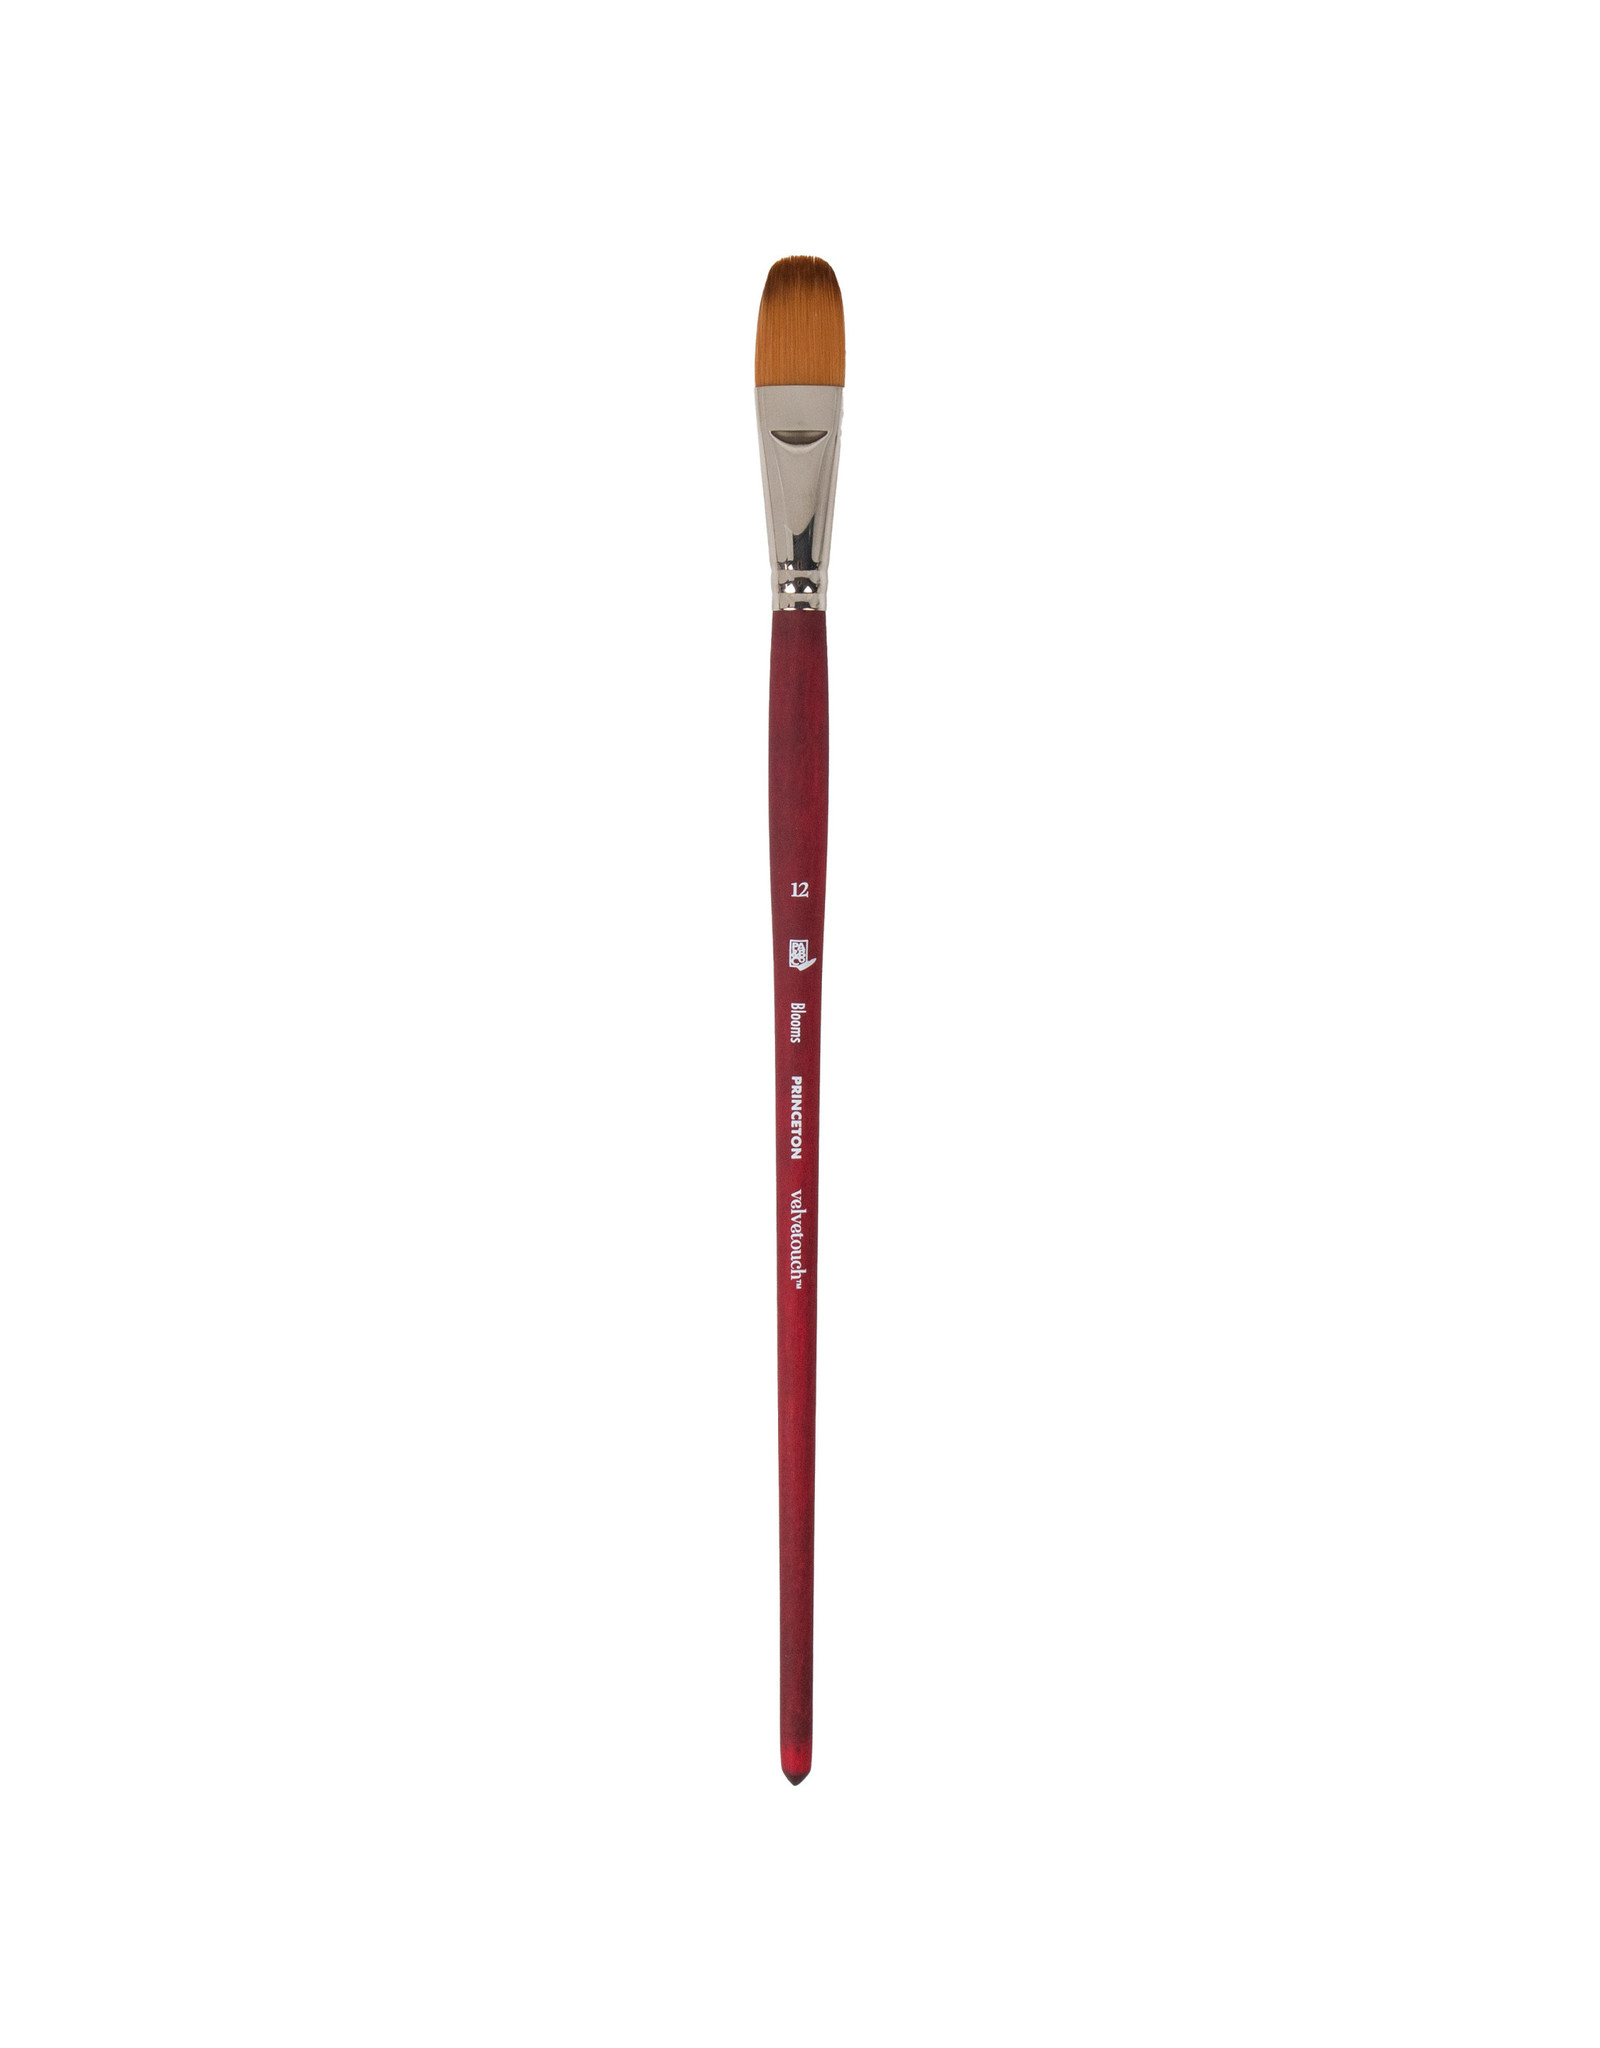 Princeton watercolour brushes review - heritage brush, velvetouch